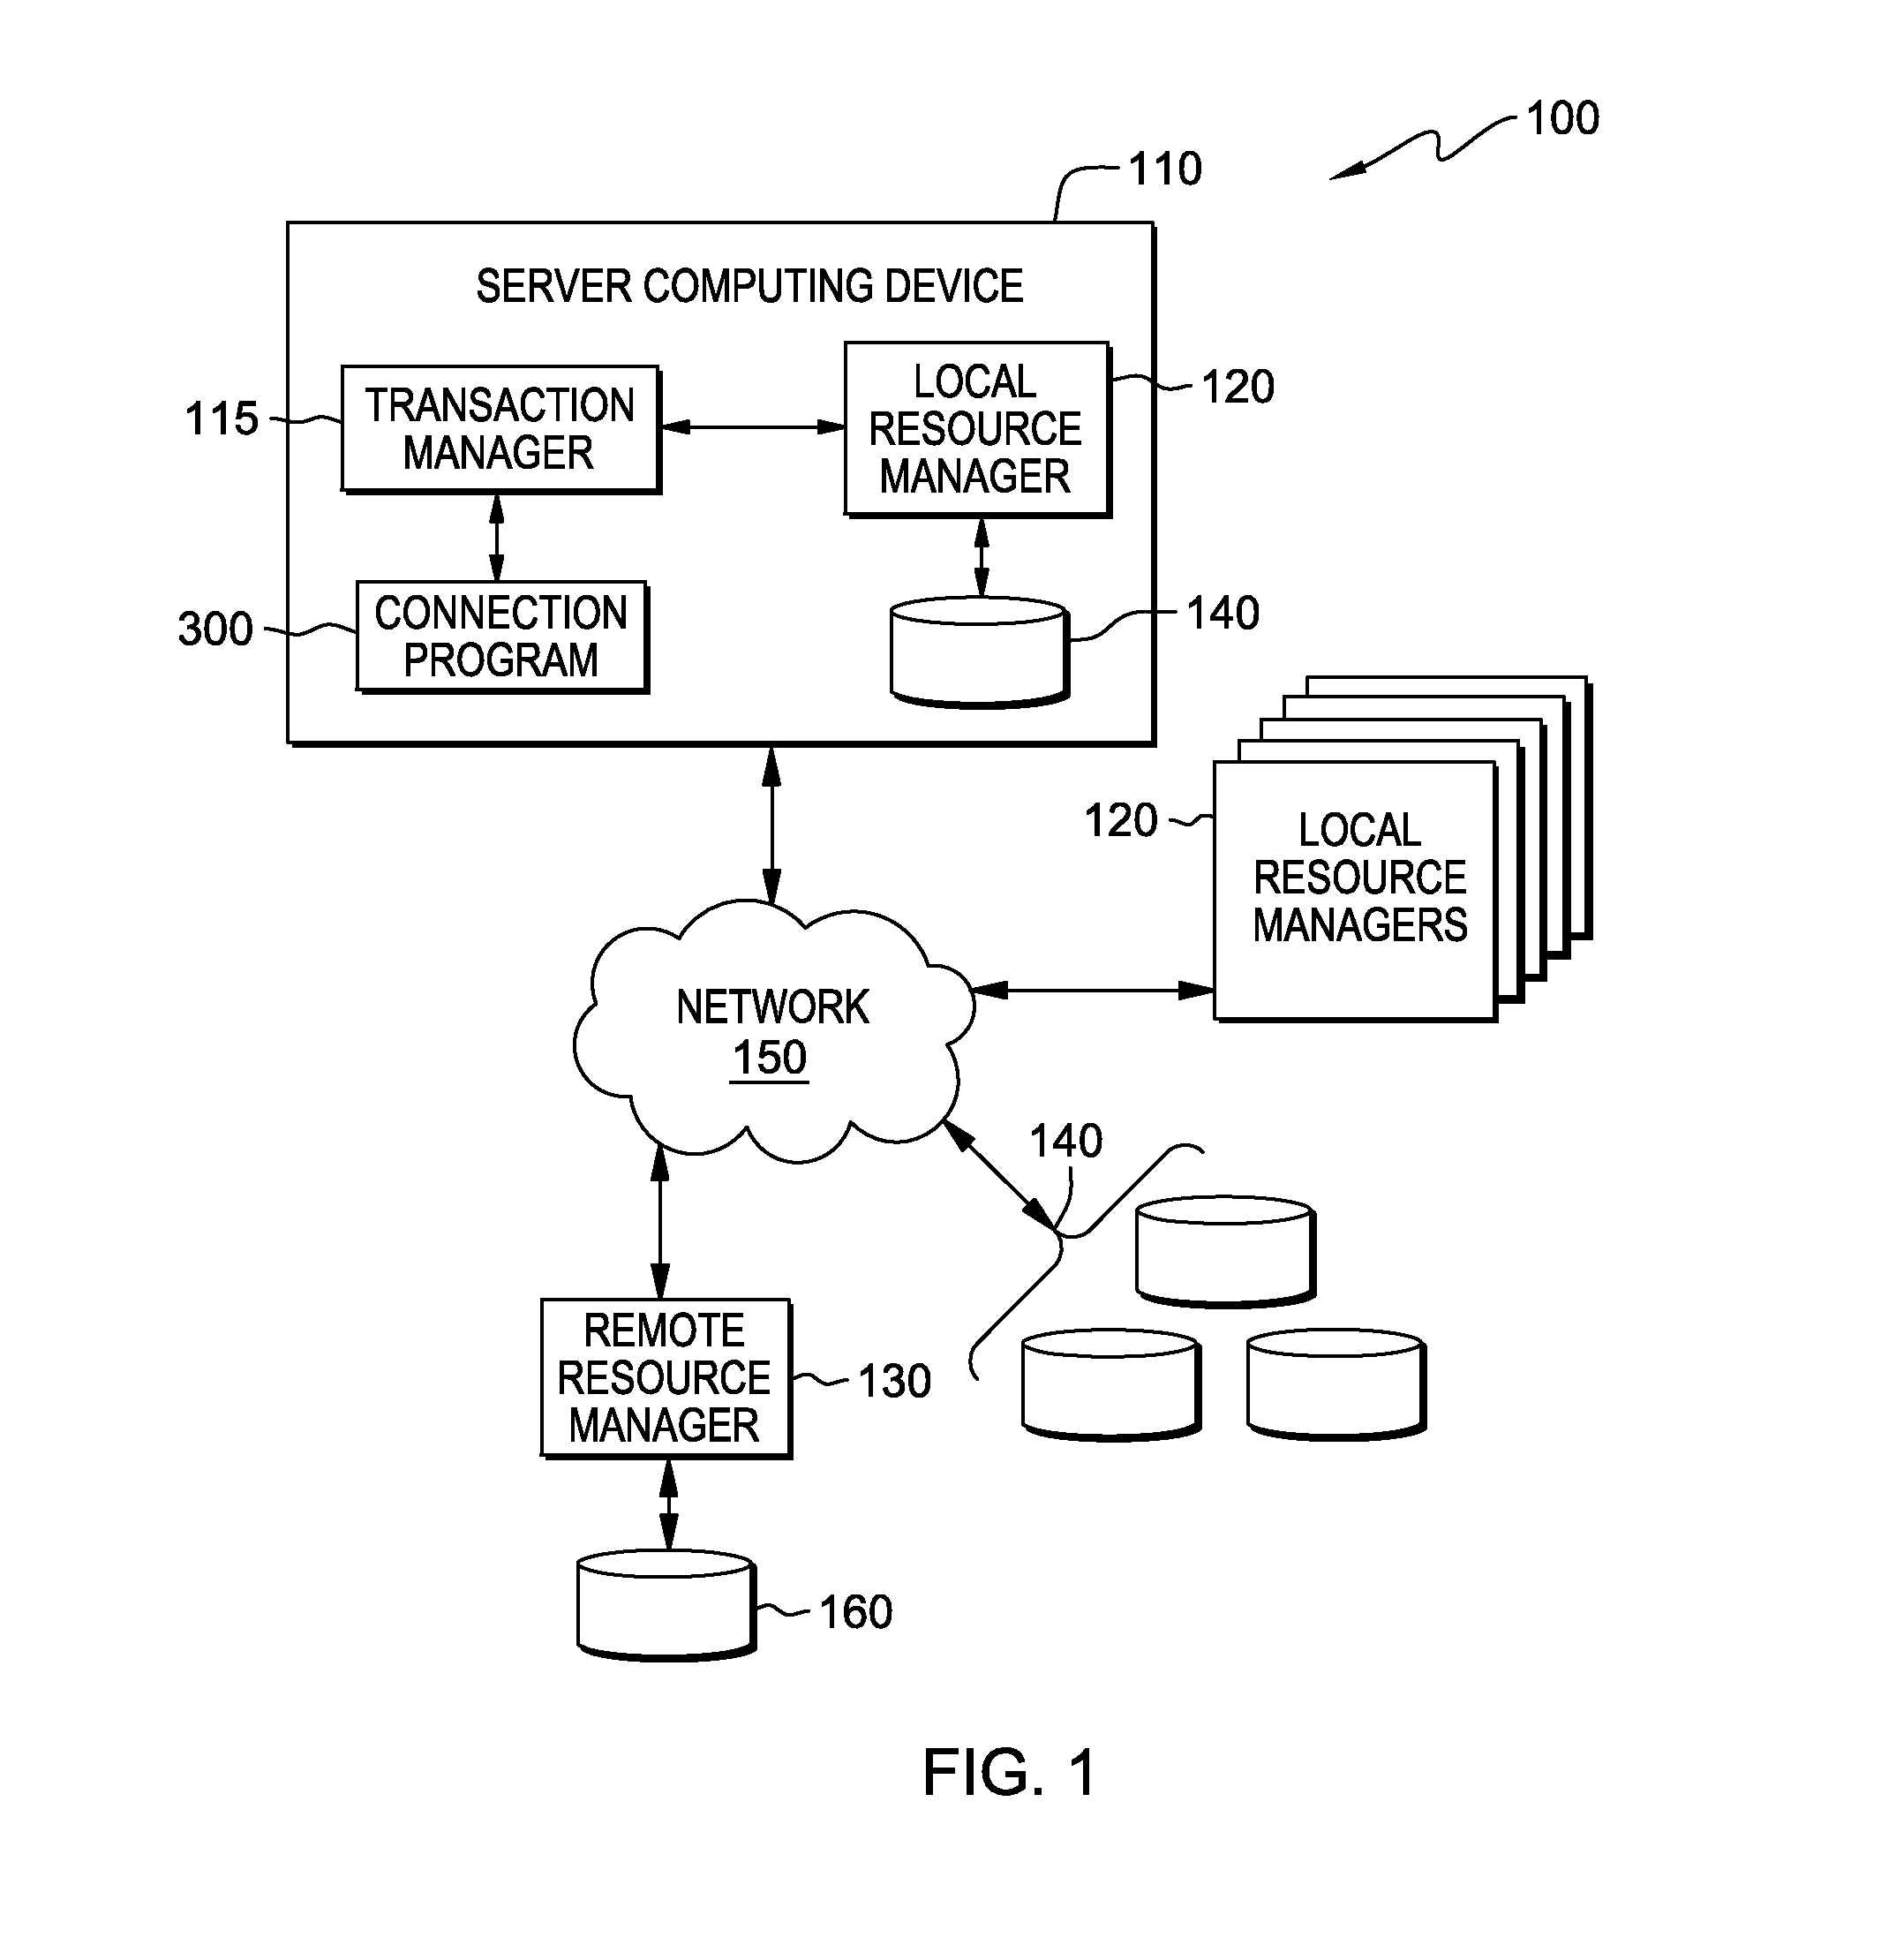 Reliability improvement of distributed transaction processing optimizations based on connection status